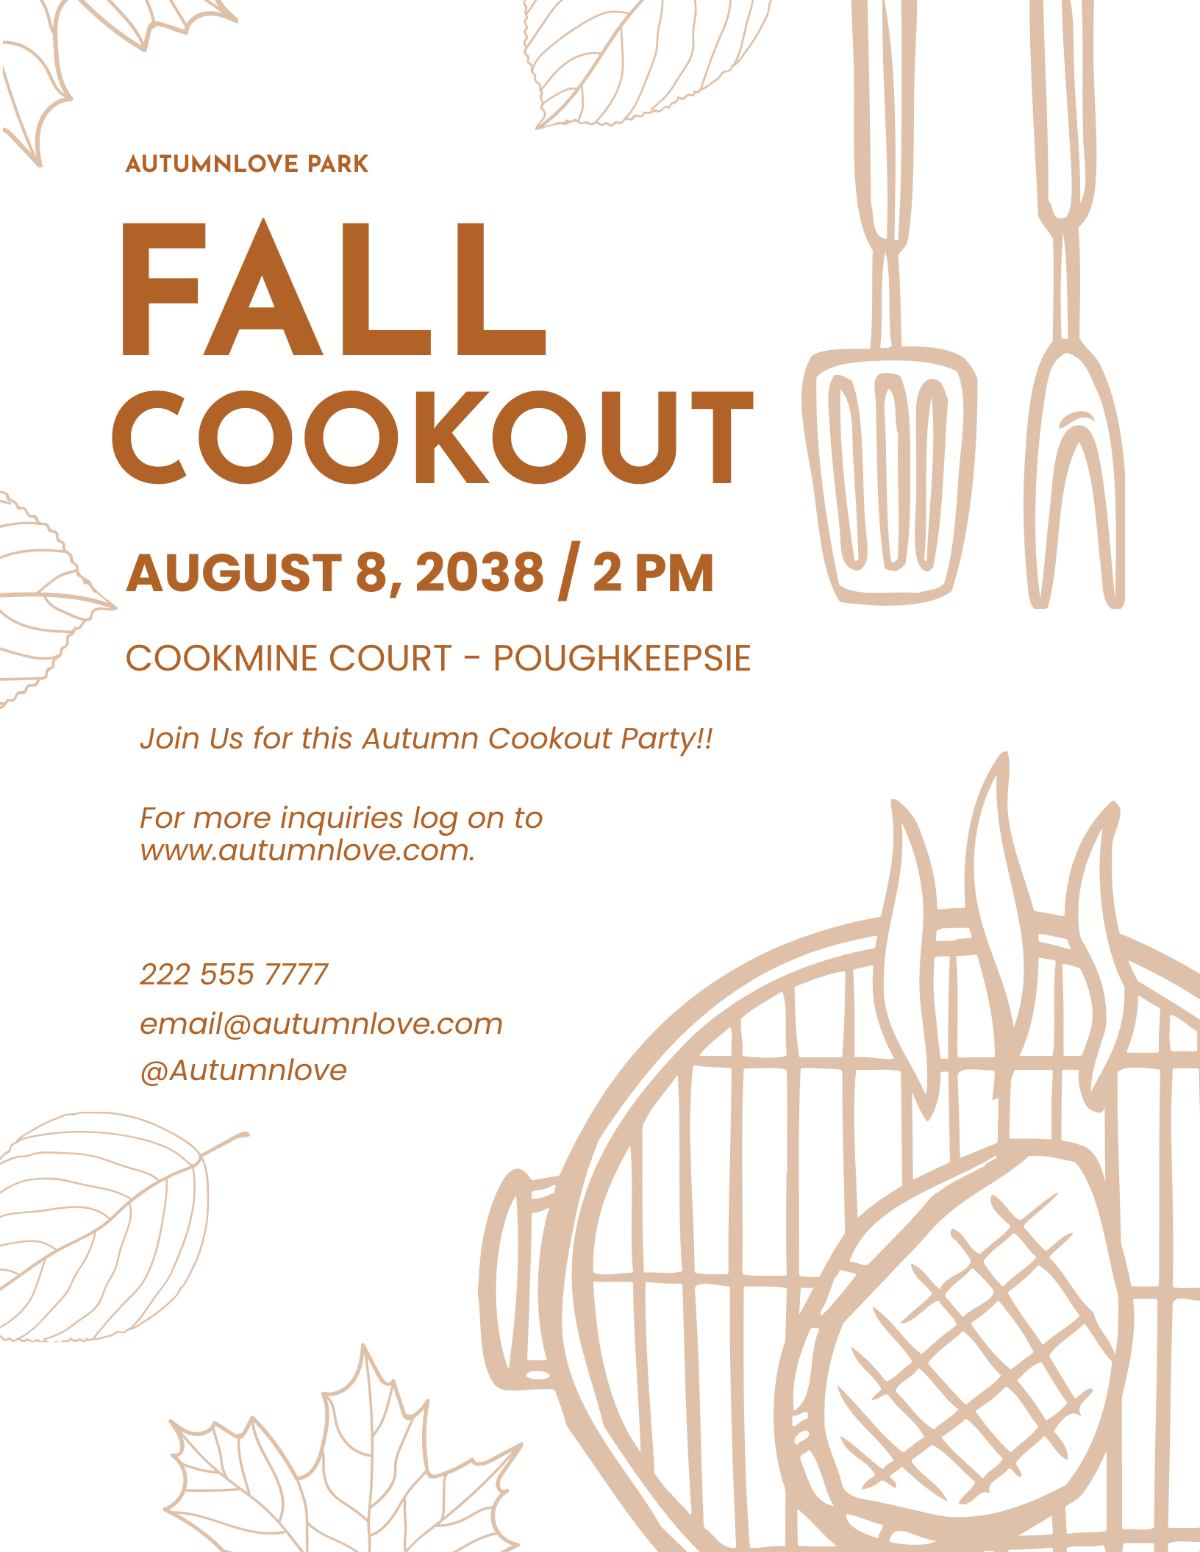 Fall Cookout Flyer